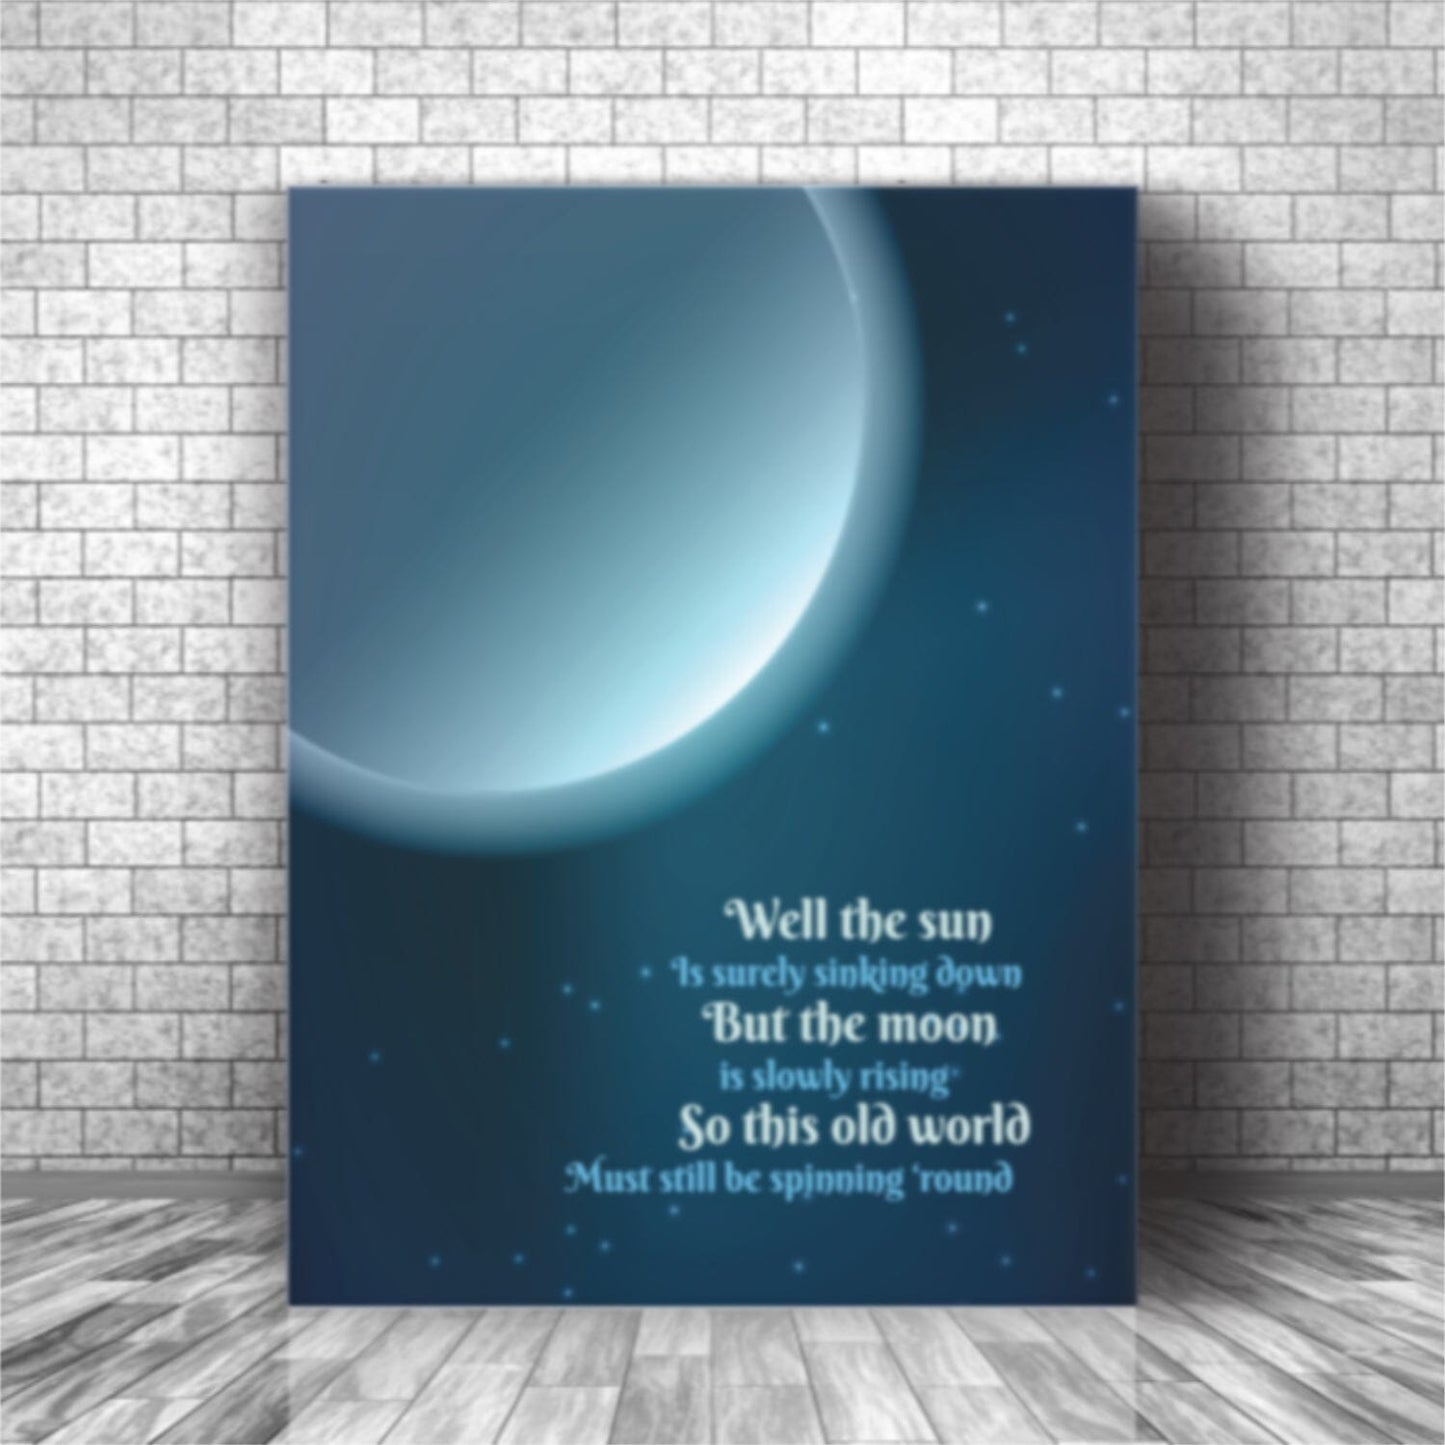 You Can Close Your Eyes by James Taylor - Music Art Print Song Lyrics Art Song Lyrics Art 11x14 Canvas Wrap 